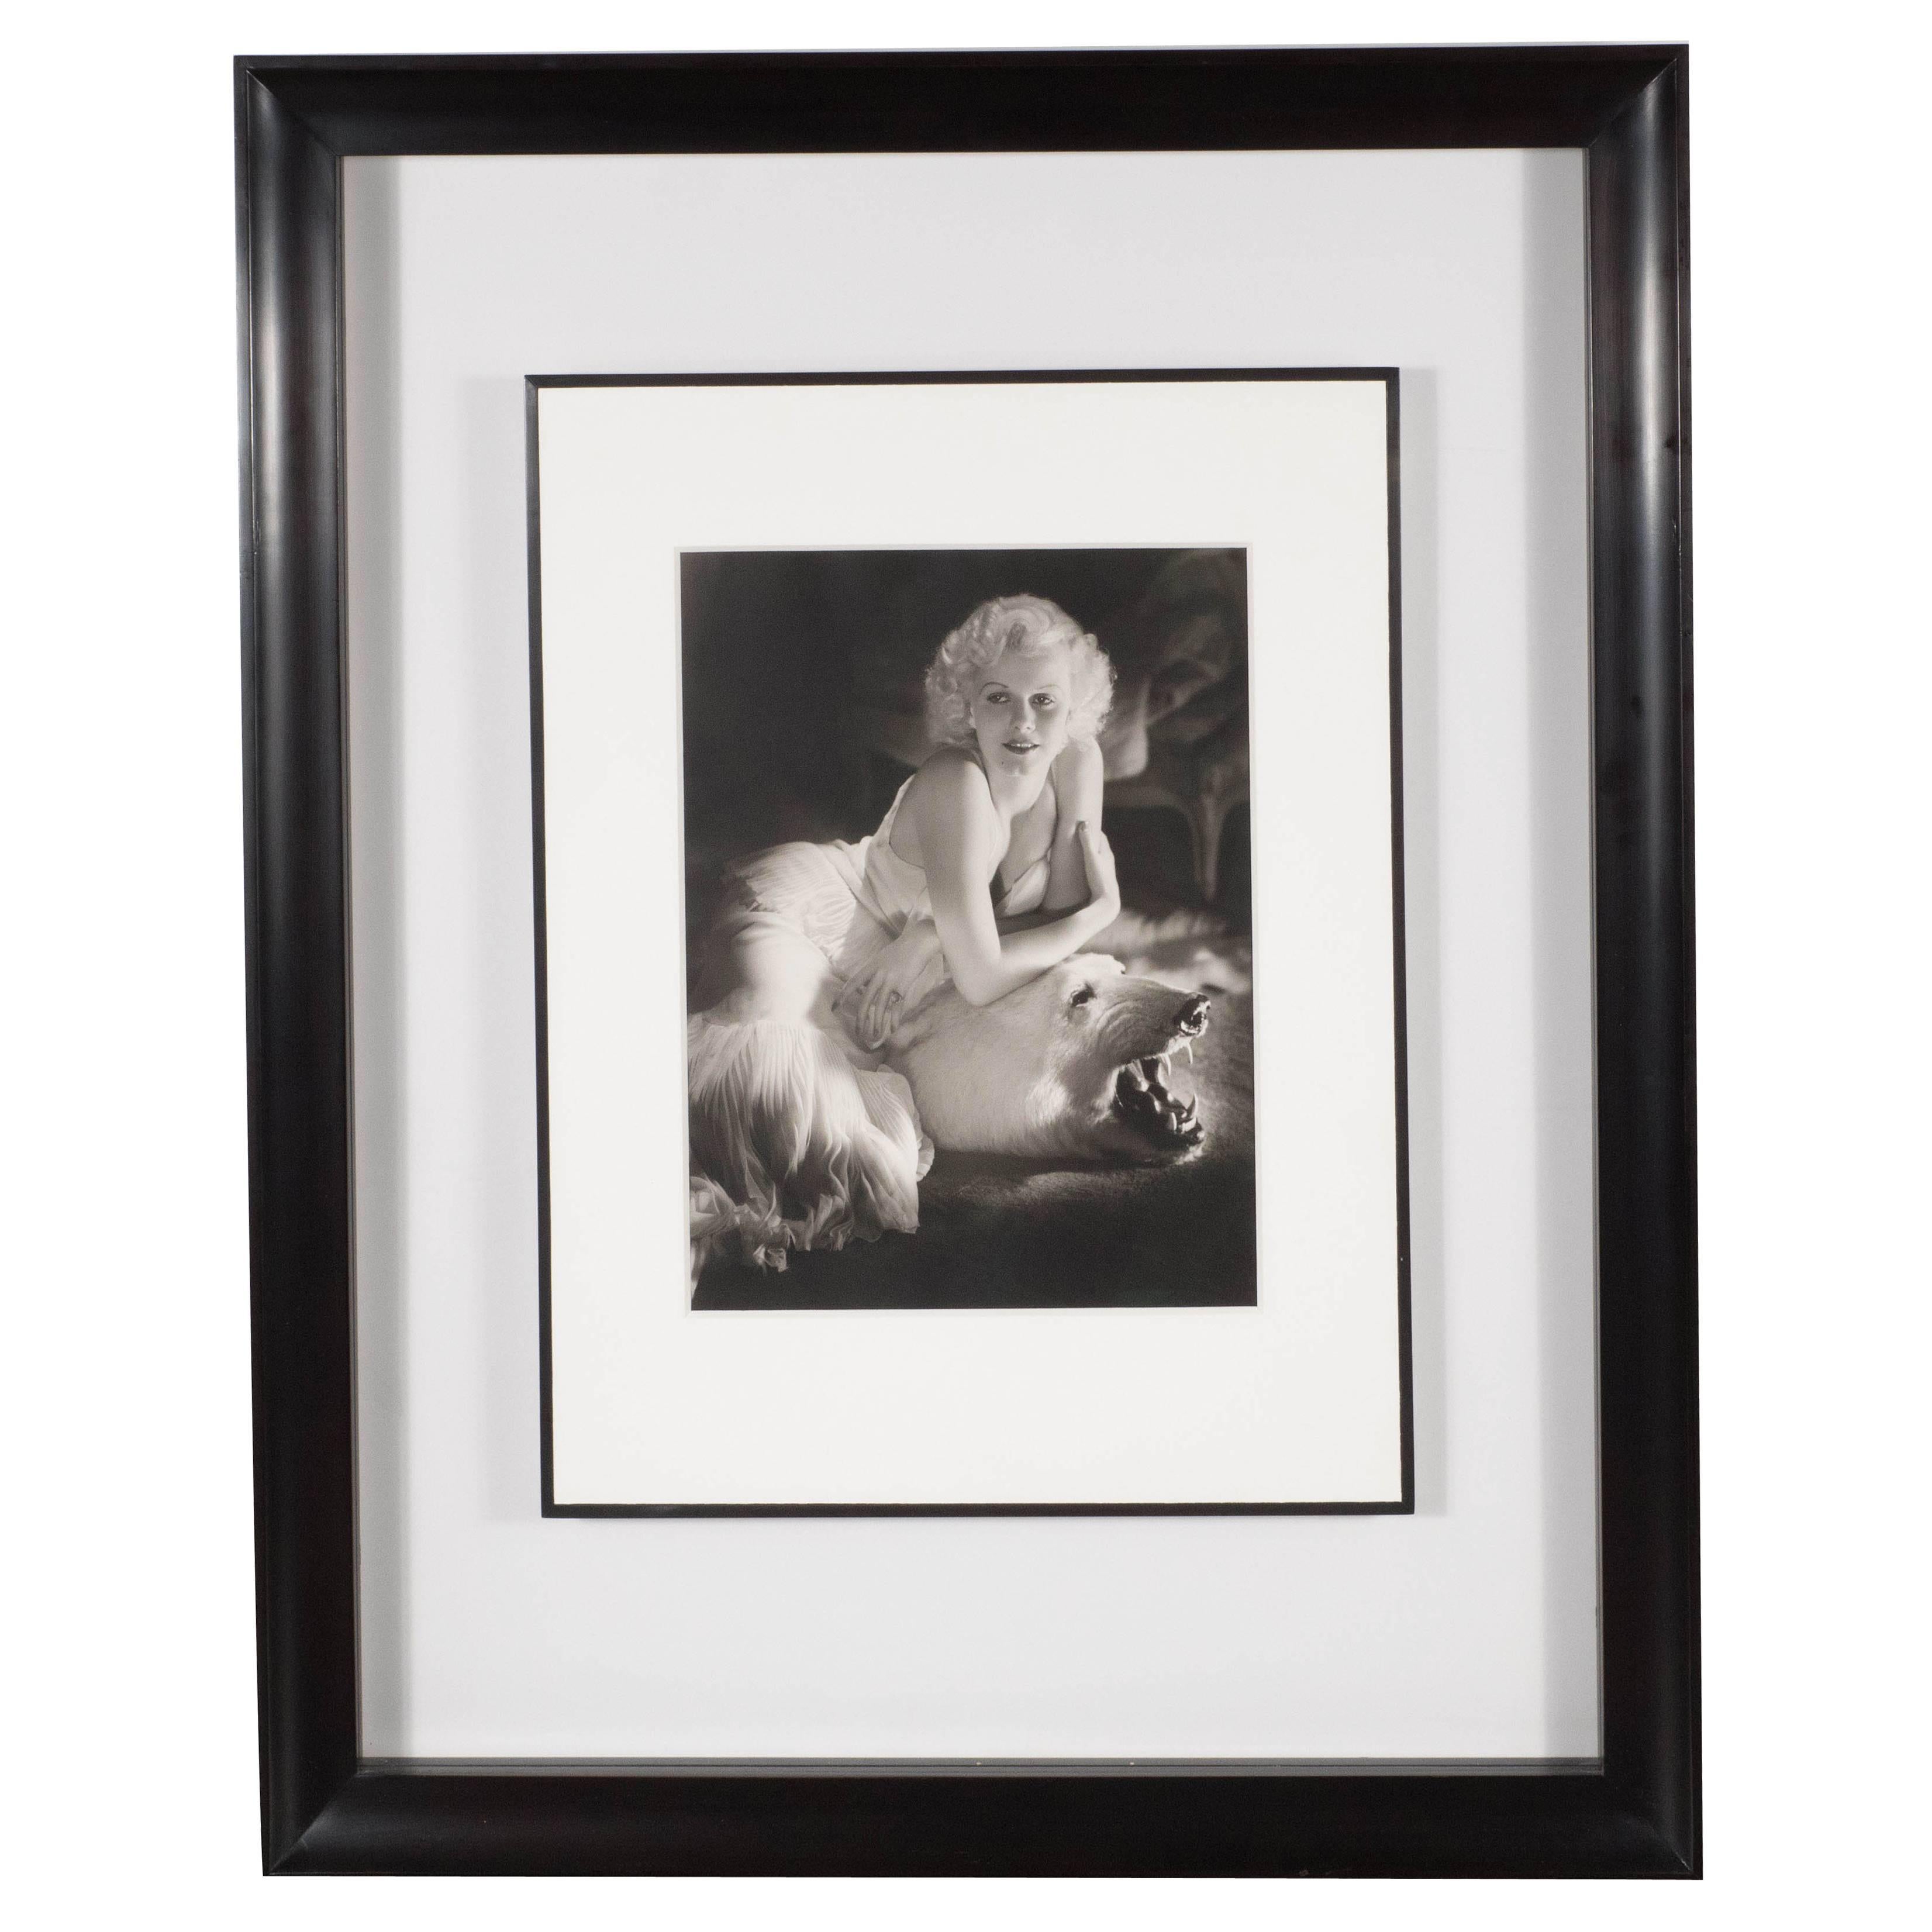 Framed and Original Documented Photograph of Jean Harlow by George Hurrell